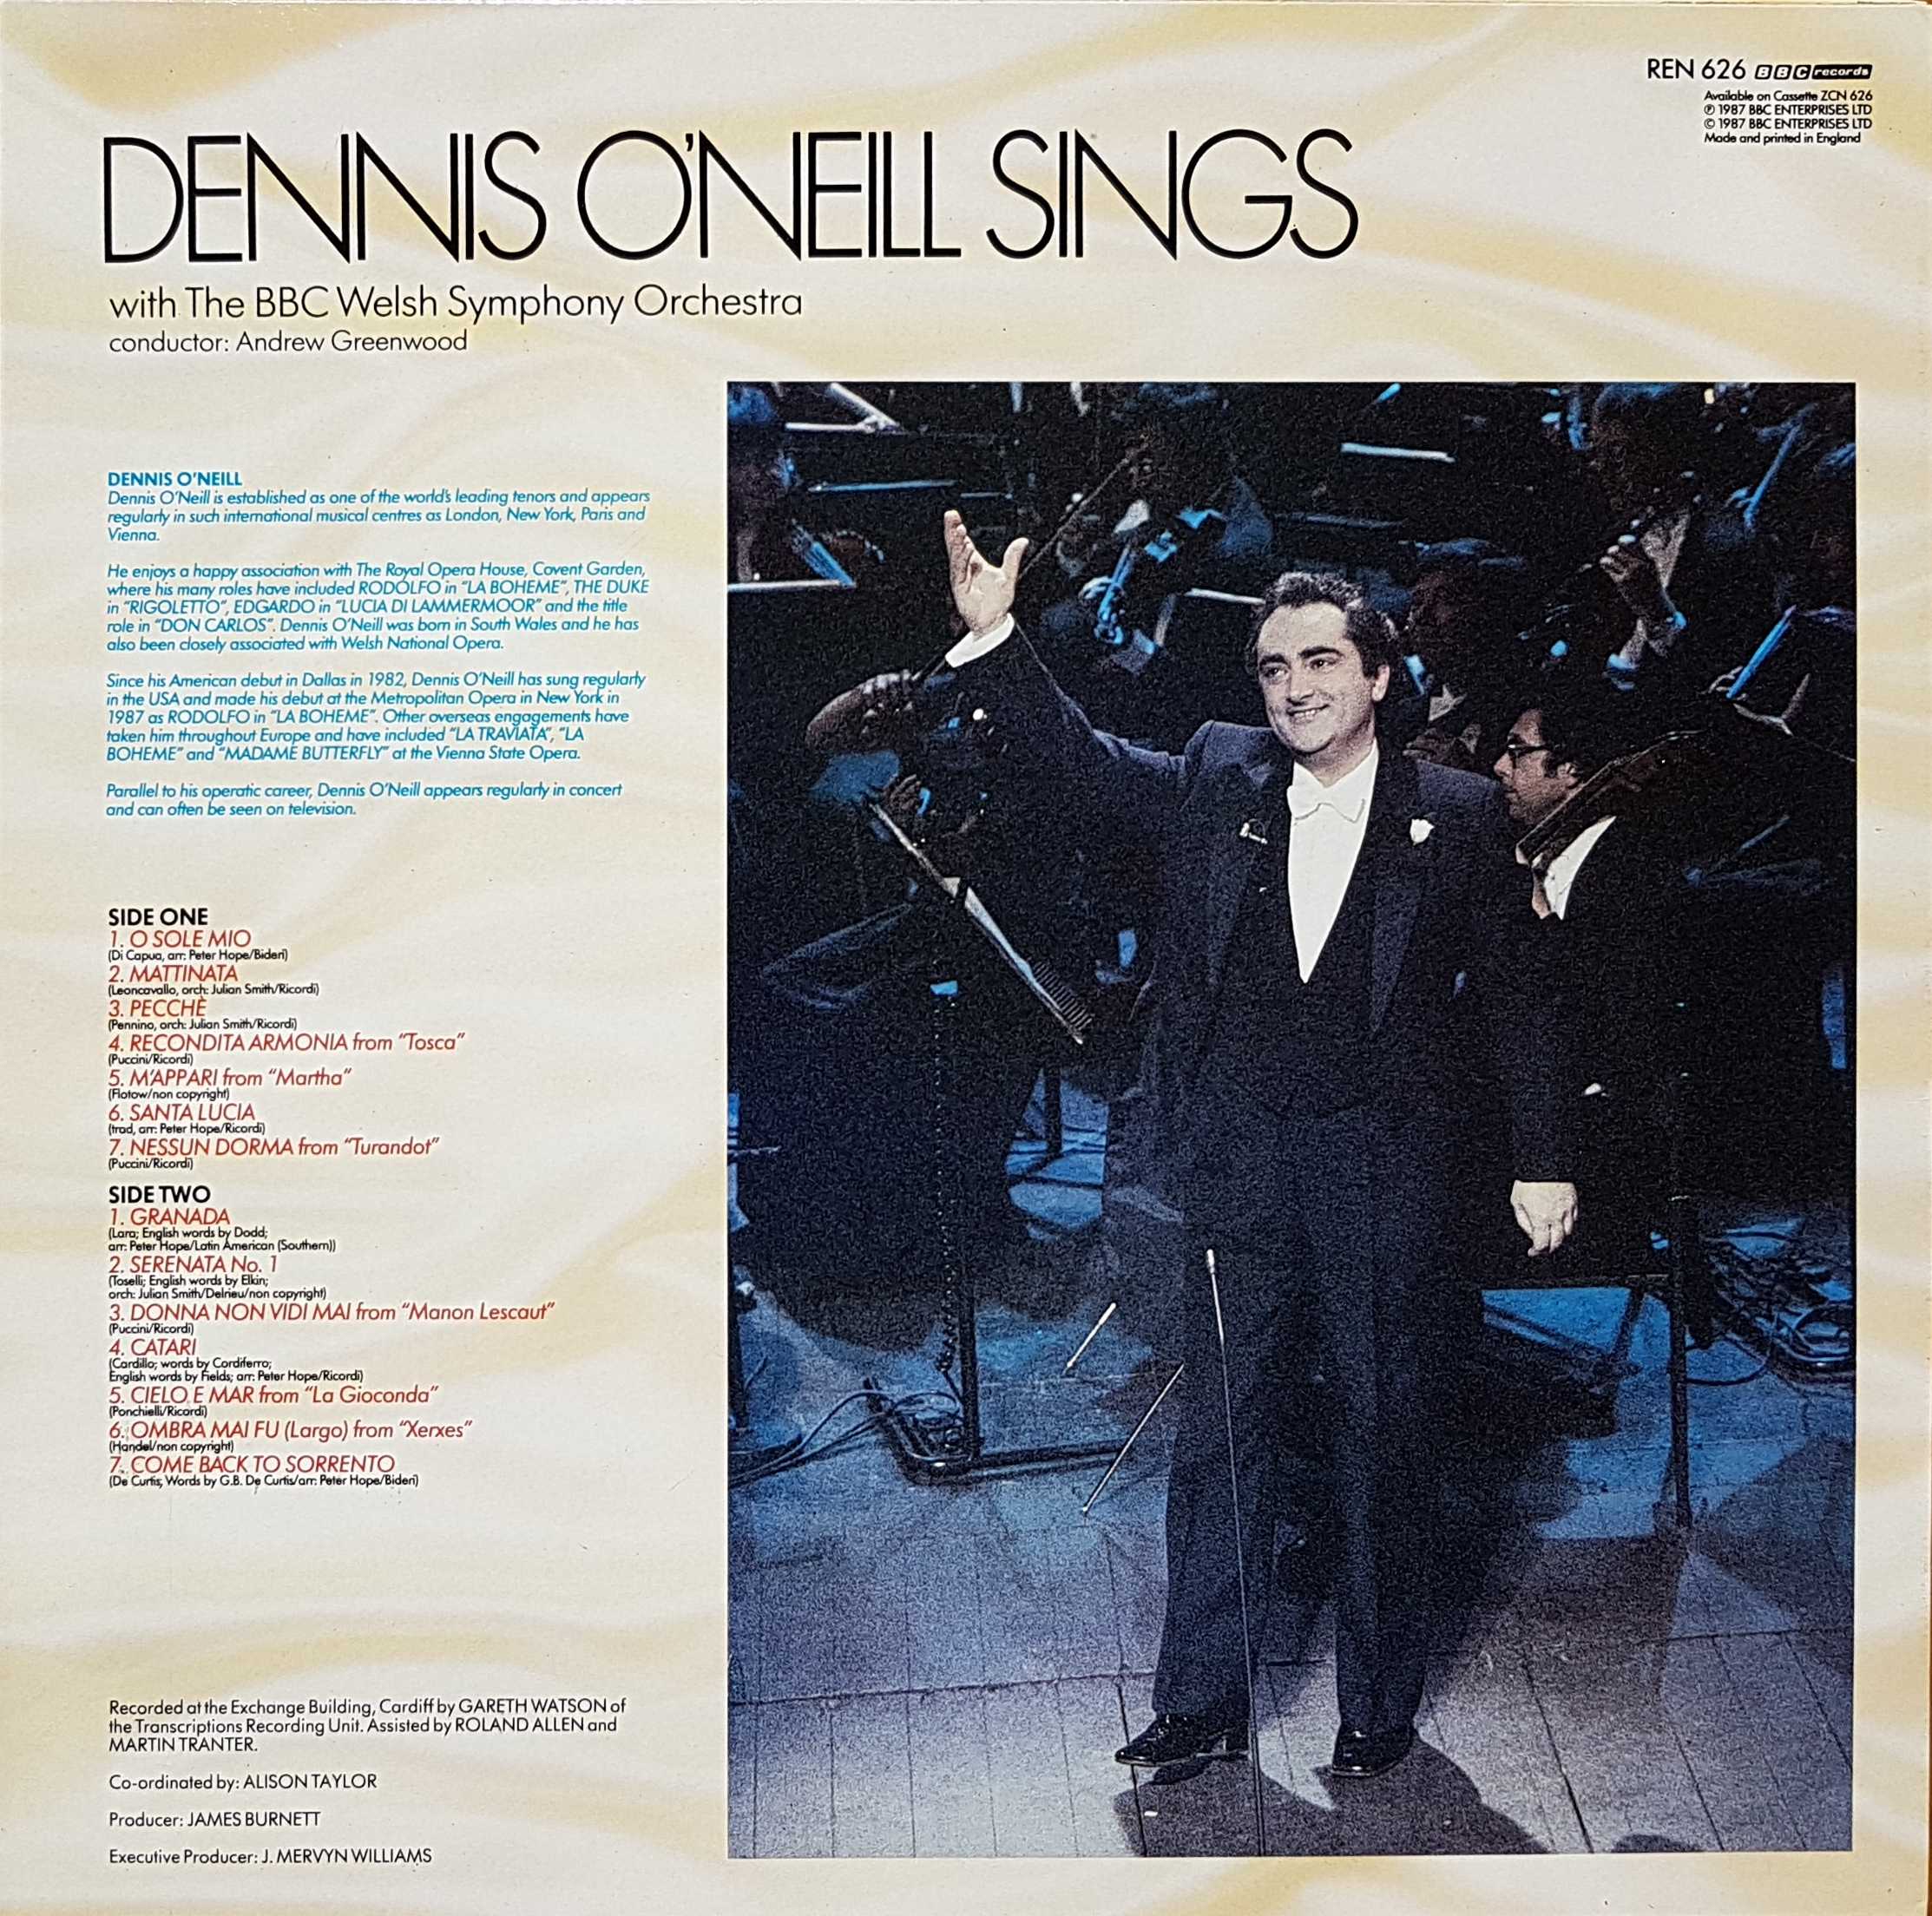 Picture of REN 626 Dennis O'Neill sings by artist Dennis O'Neill  from the BBC records and Tapes library